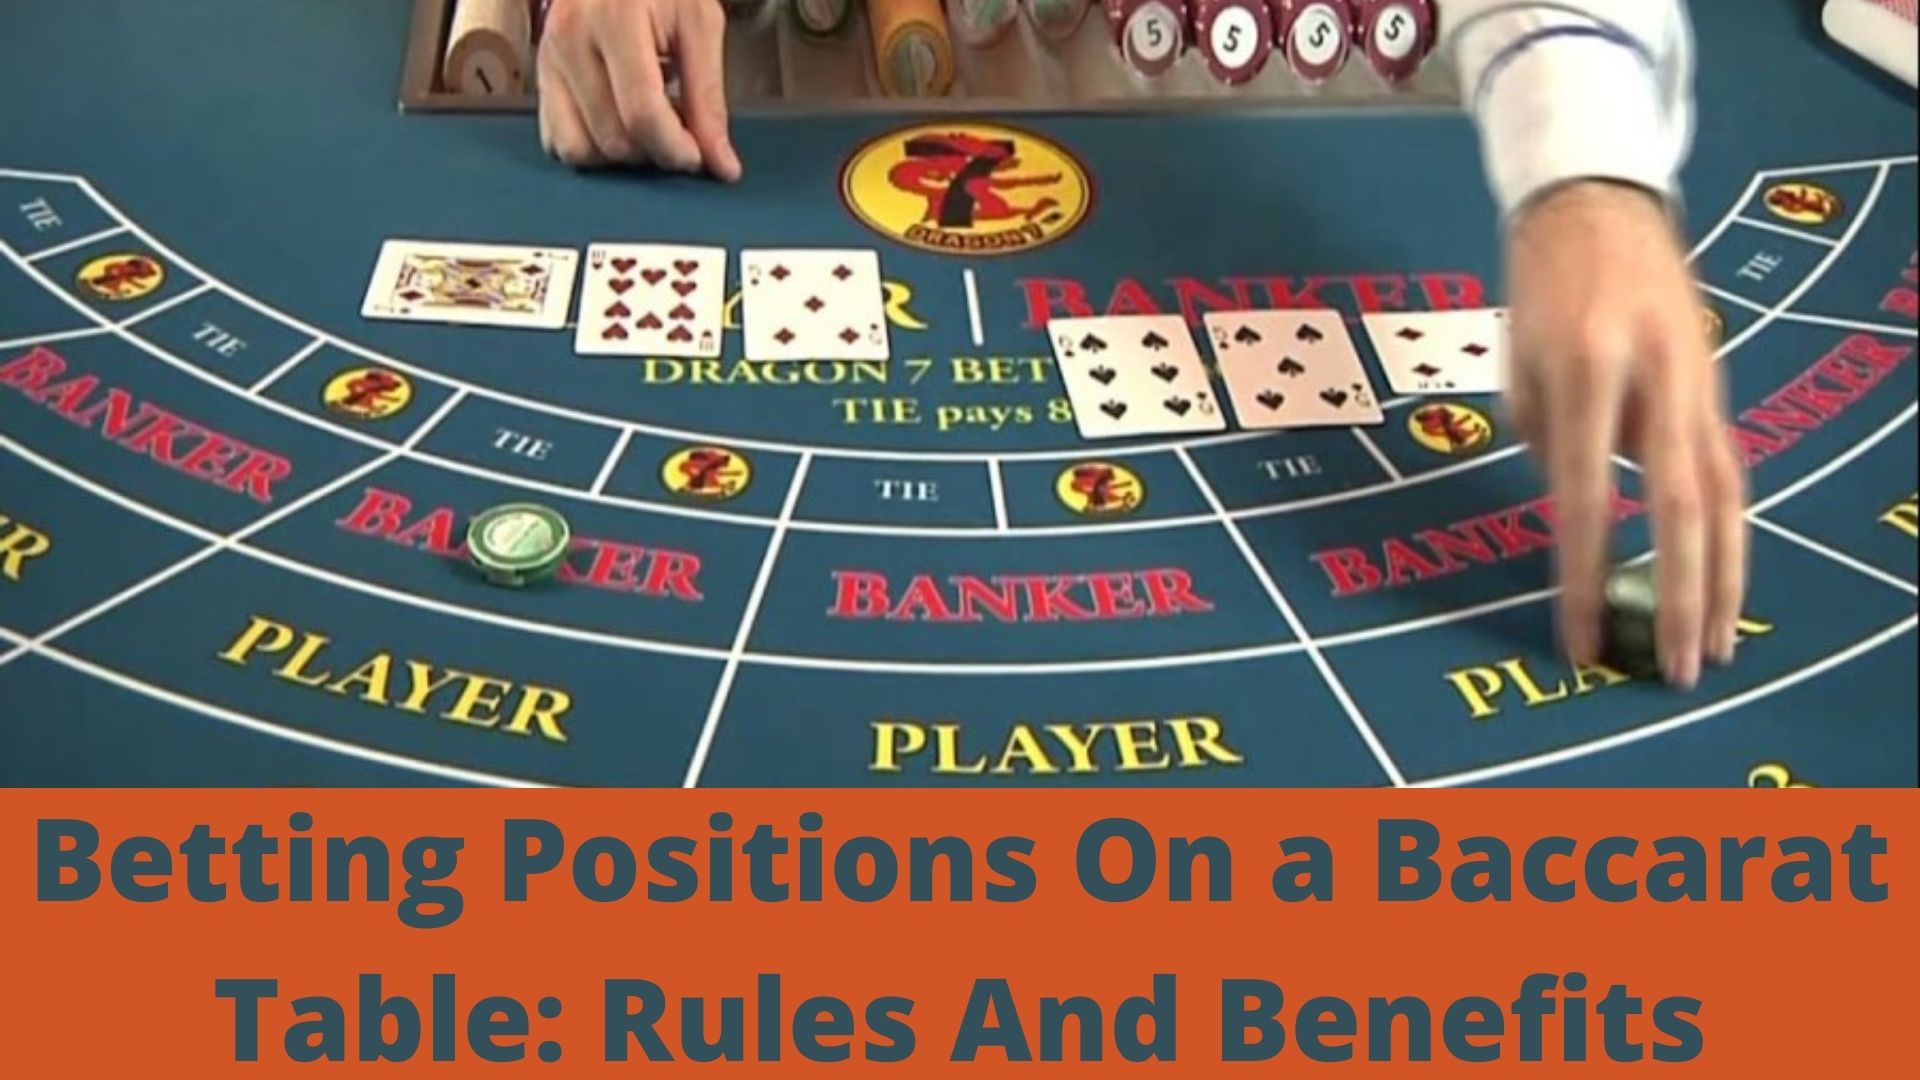 Betting Positions On a Baccarat Table